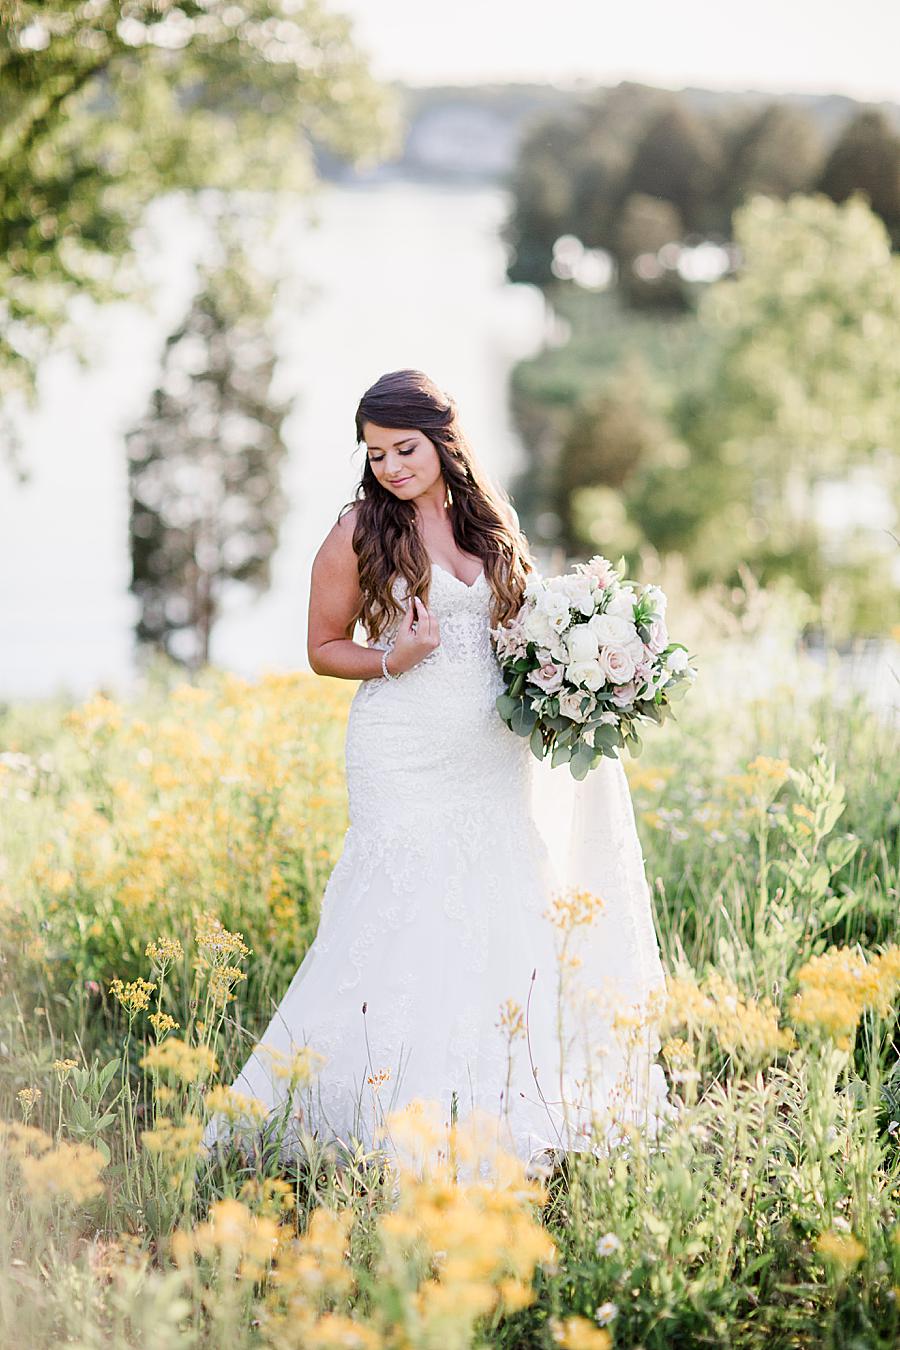 Corseted wedding gown at this WindRiver Bridal Portraits by Knoxville Wedding Photographer, Amanda May Photos.